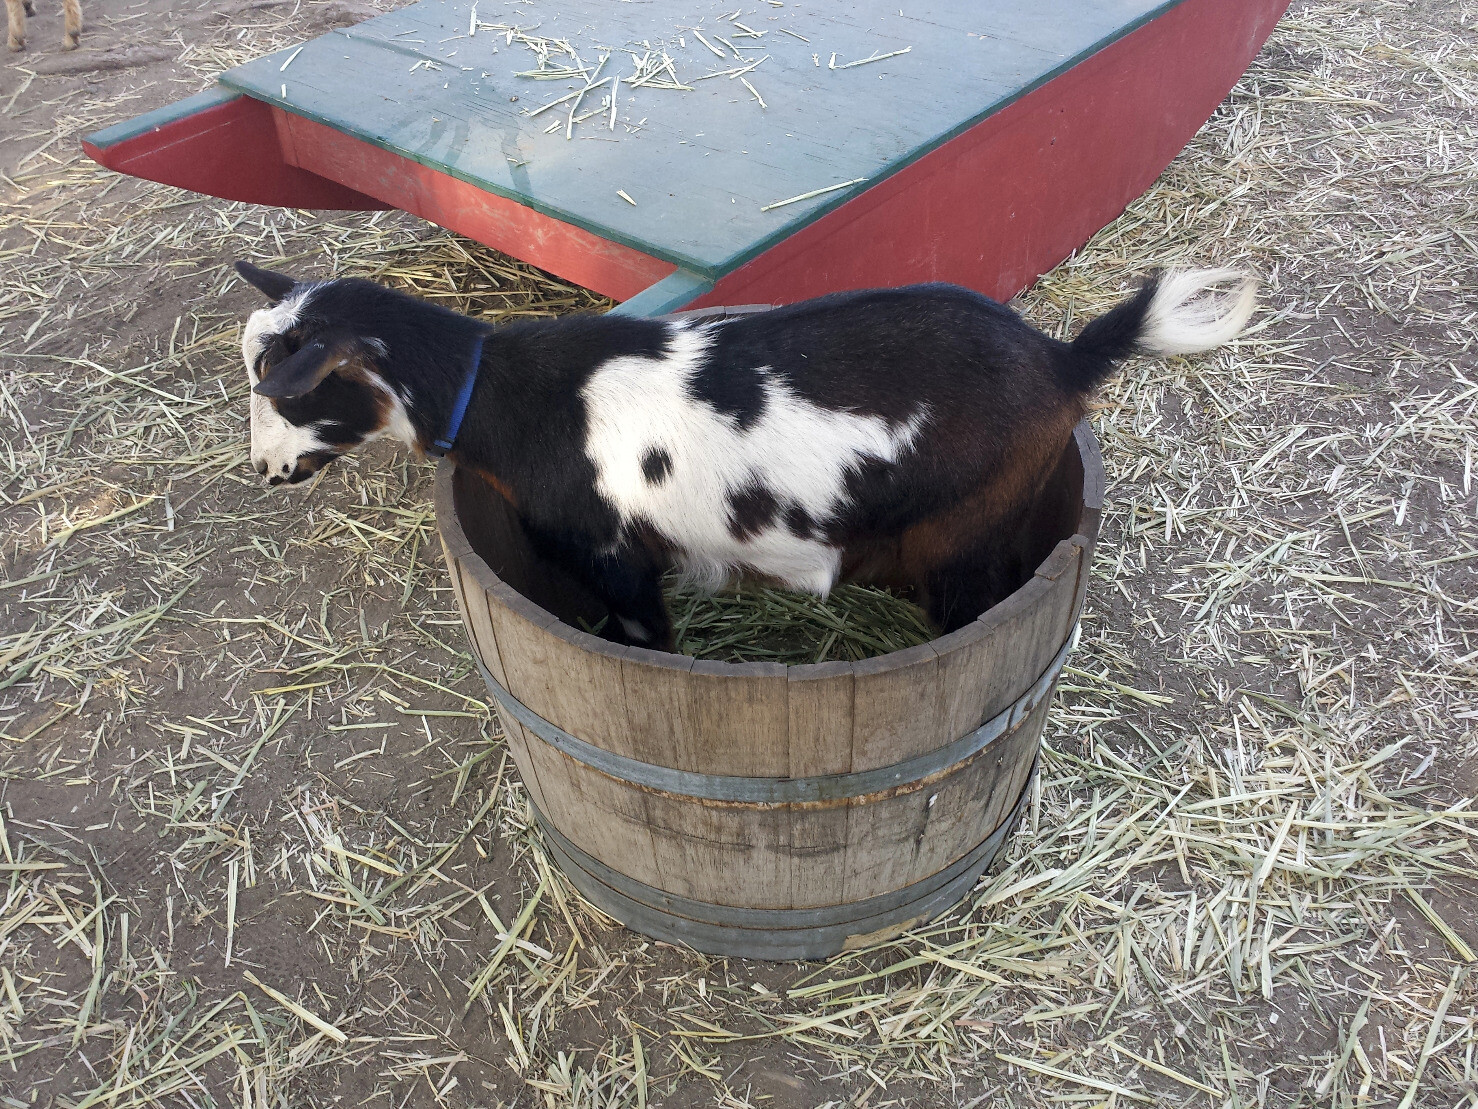 A goat standing in a wooden tub.